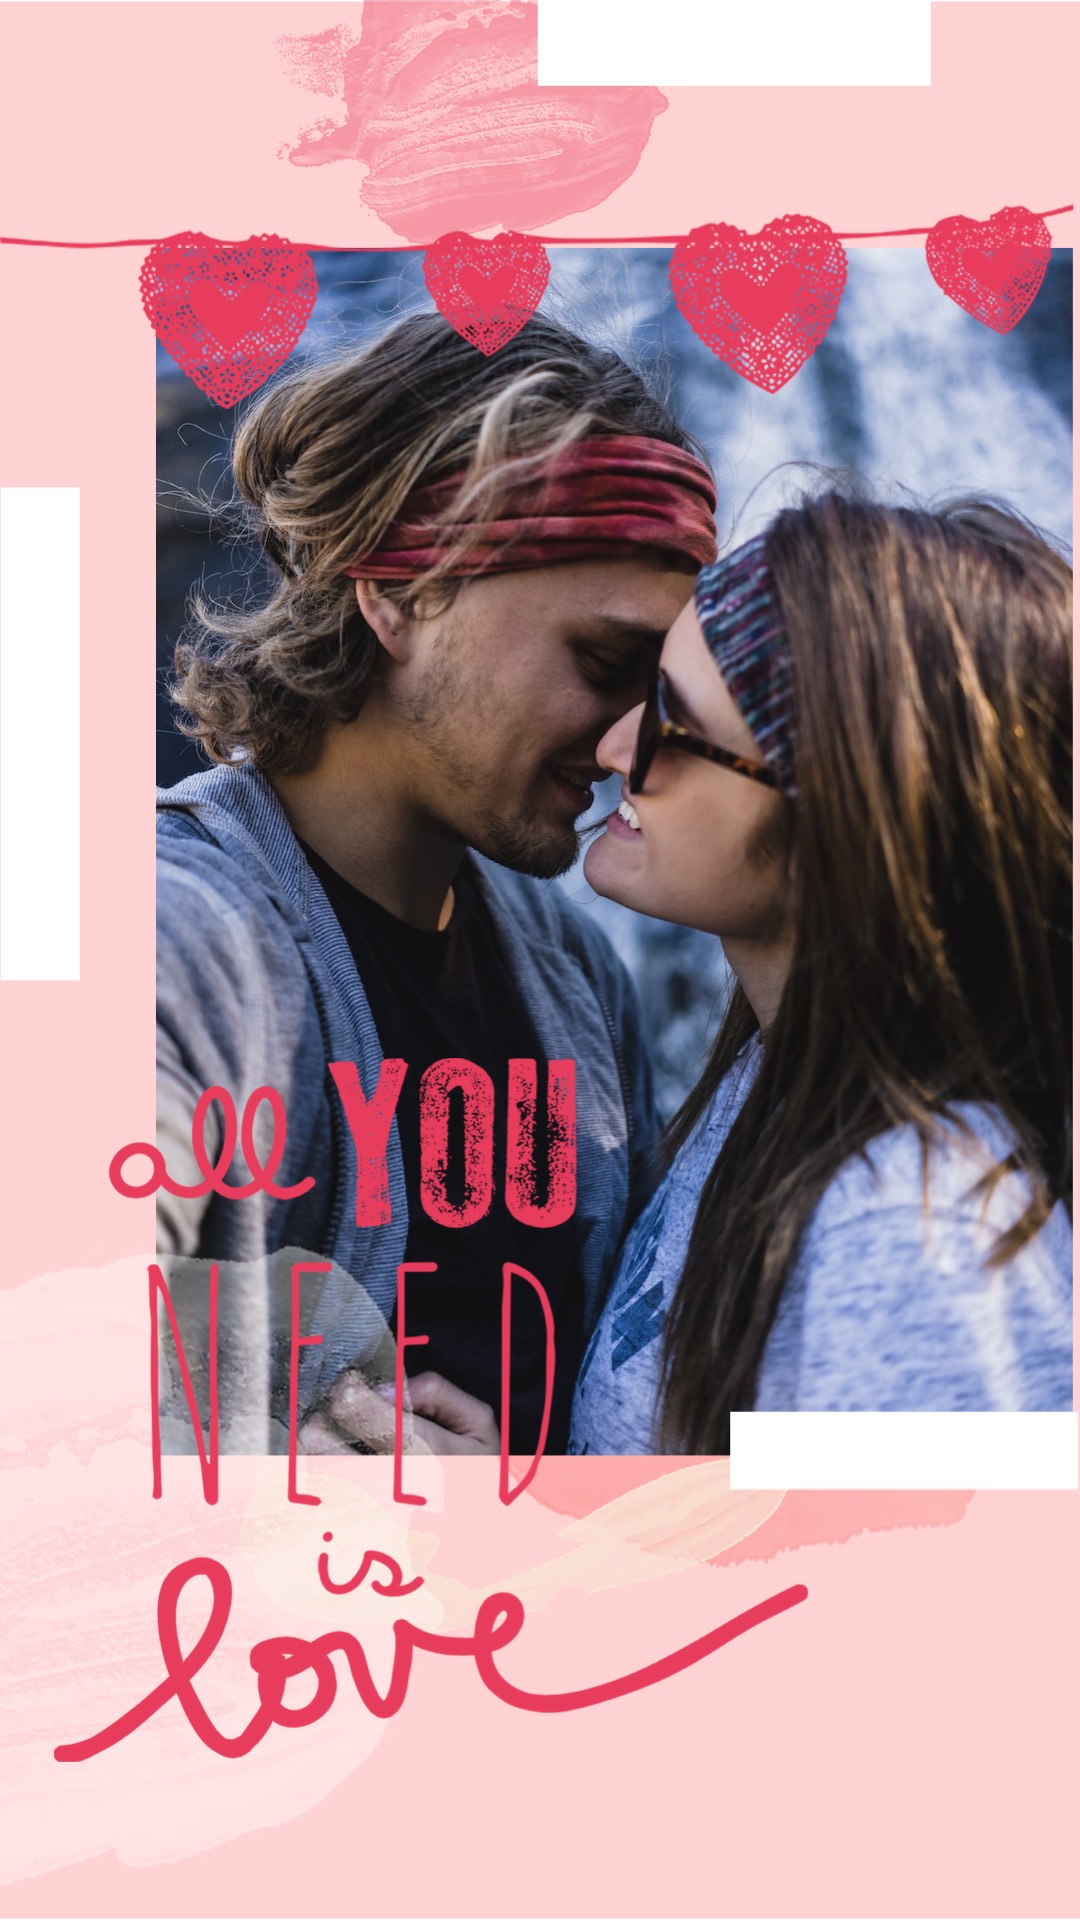 Couple in love "All you need is love" story template